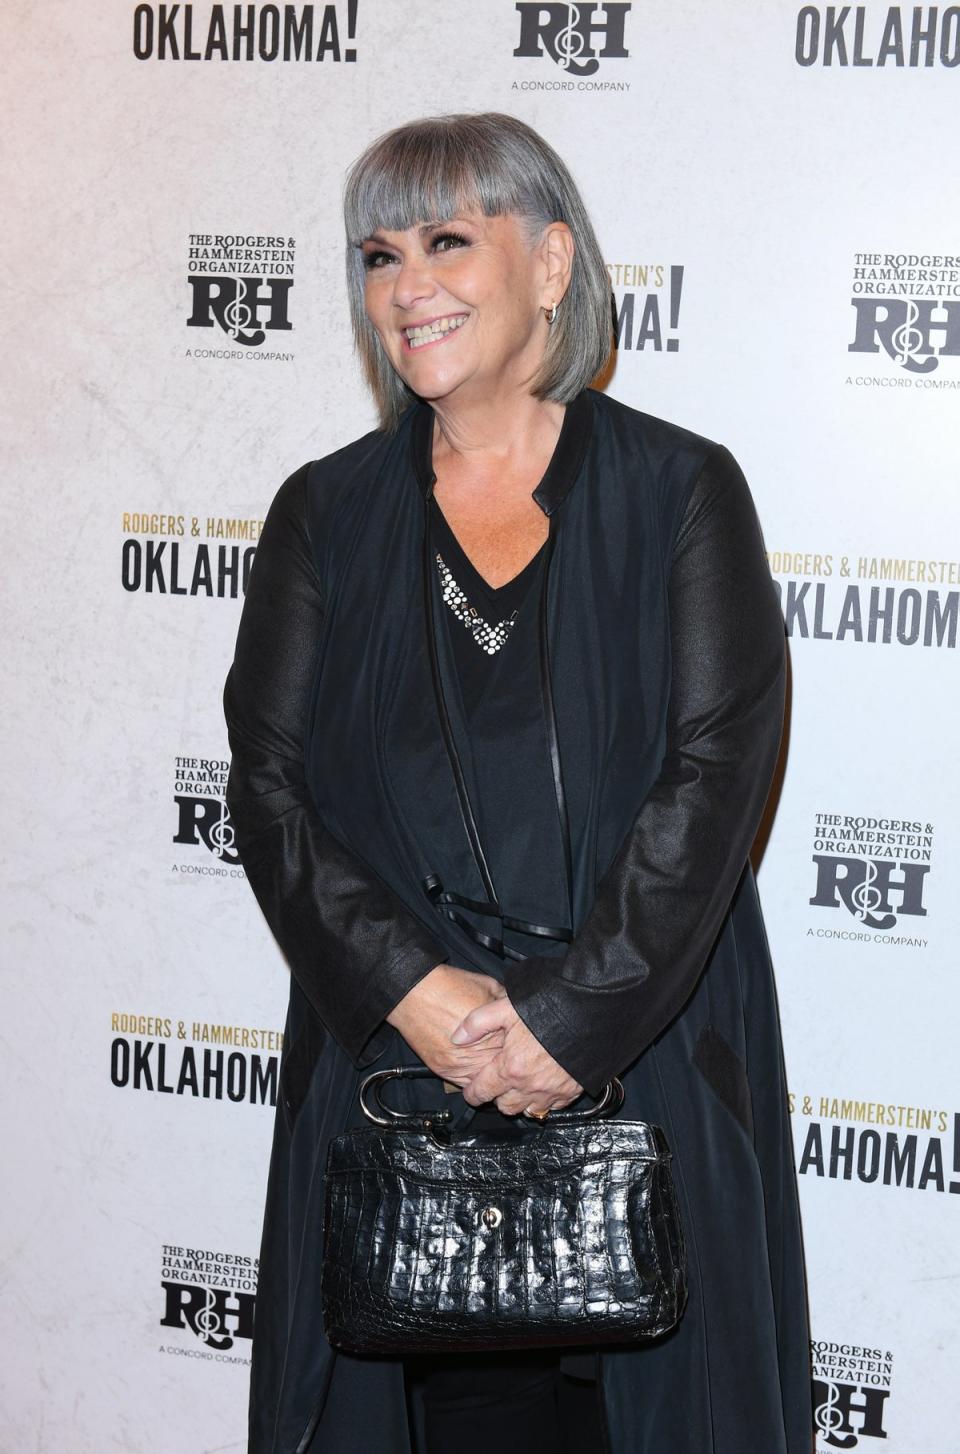 French recently showed off her 7.5 stone weight loss at the Oklahoma! opening night in London (Getty Images)